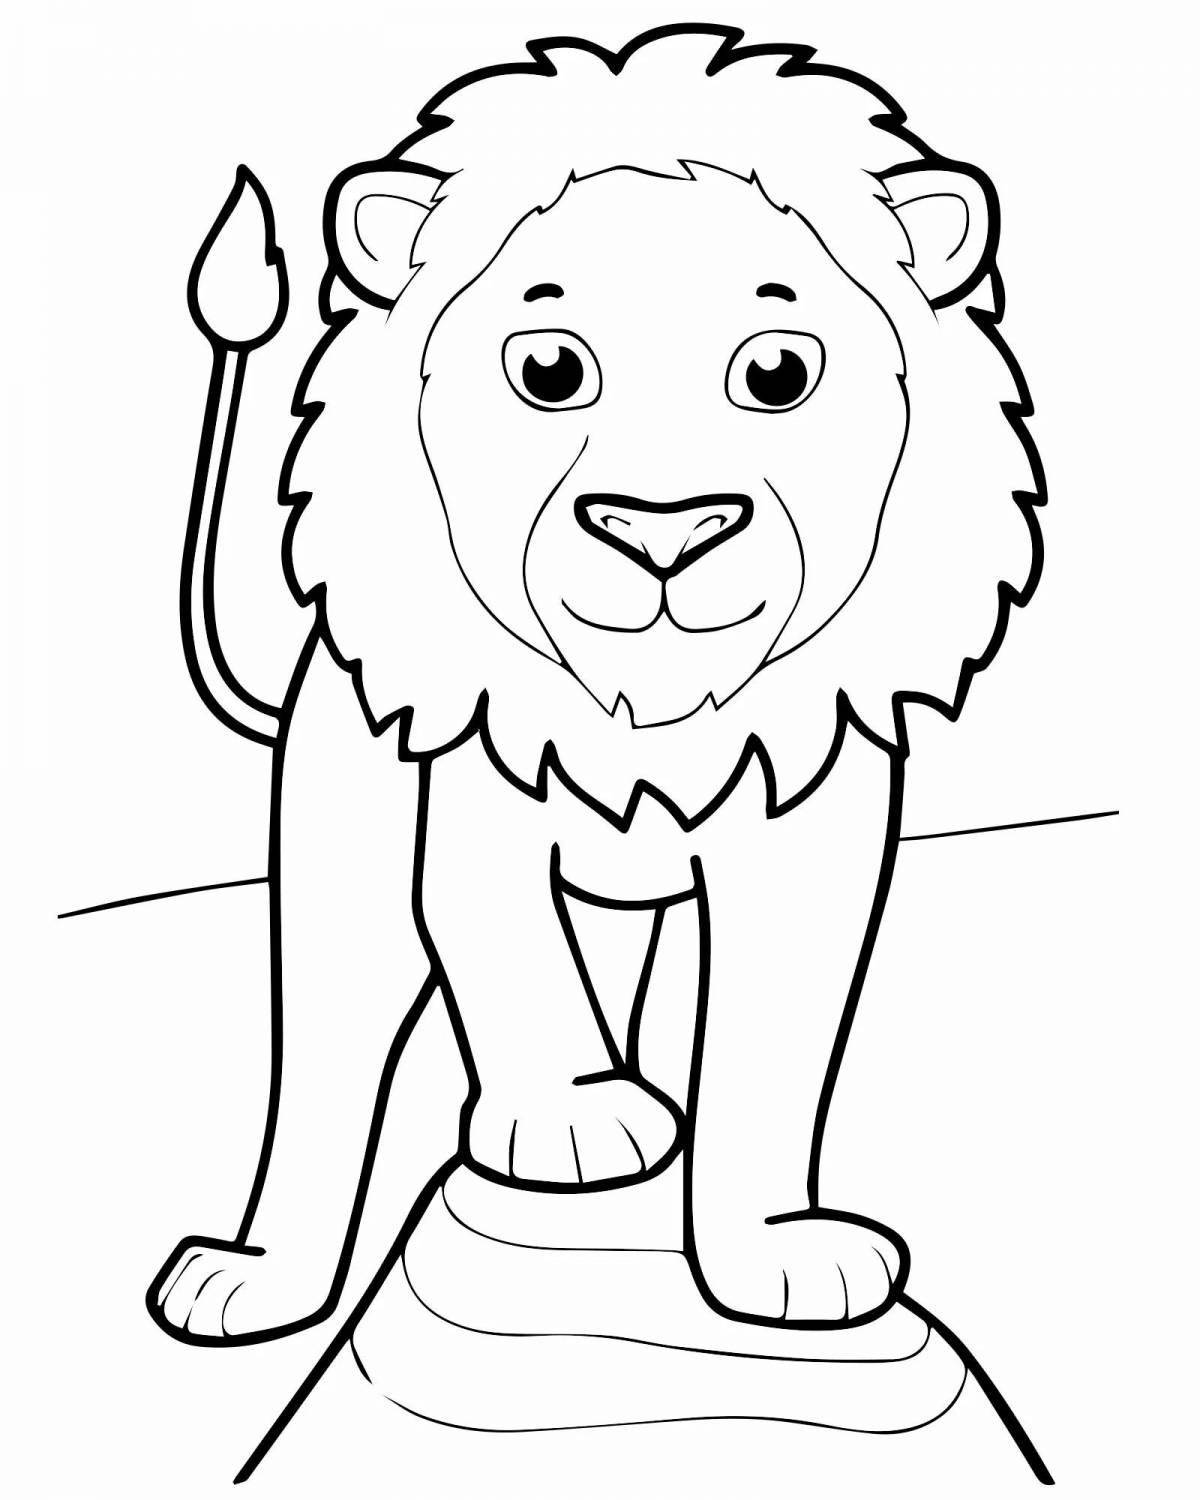 Awesome lion coloring page